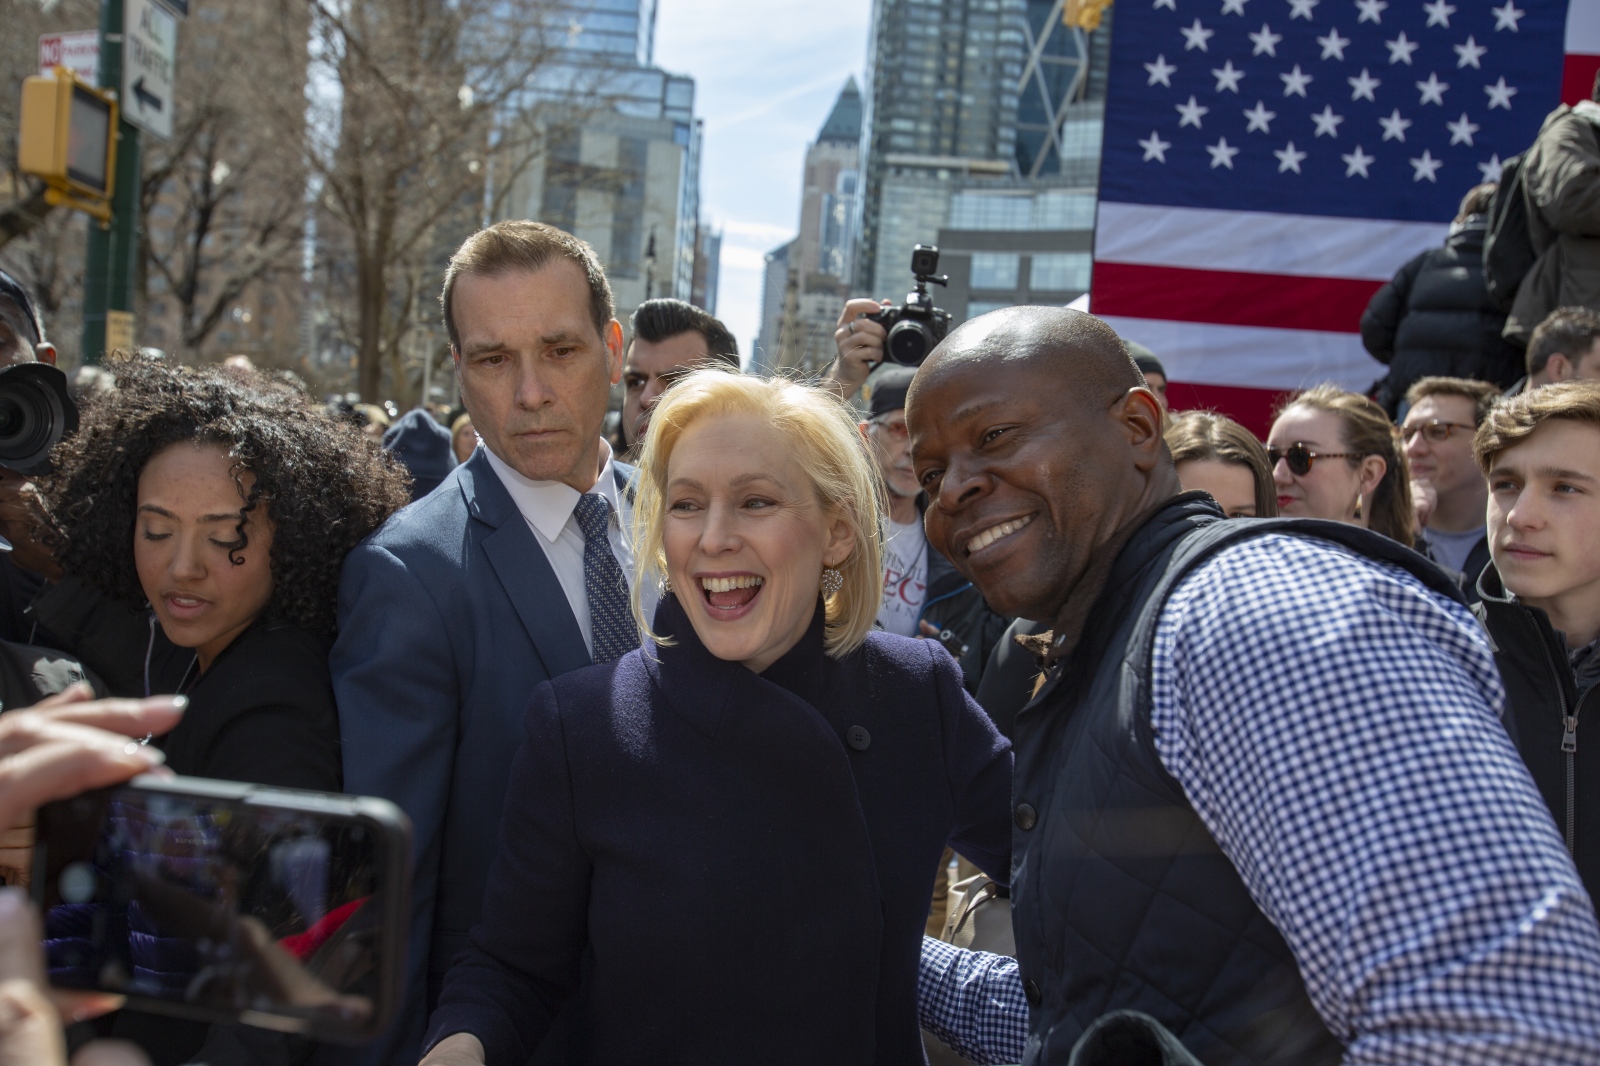 Image from A Time to Stand Up  - United States Senator Kirsten Gillibrand greets...